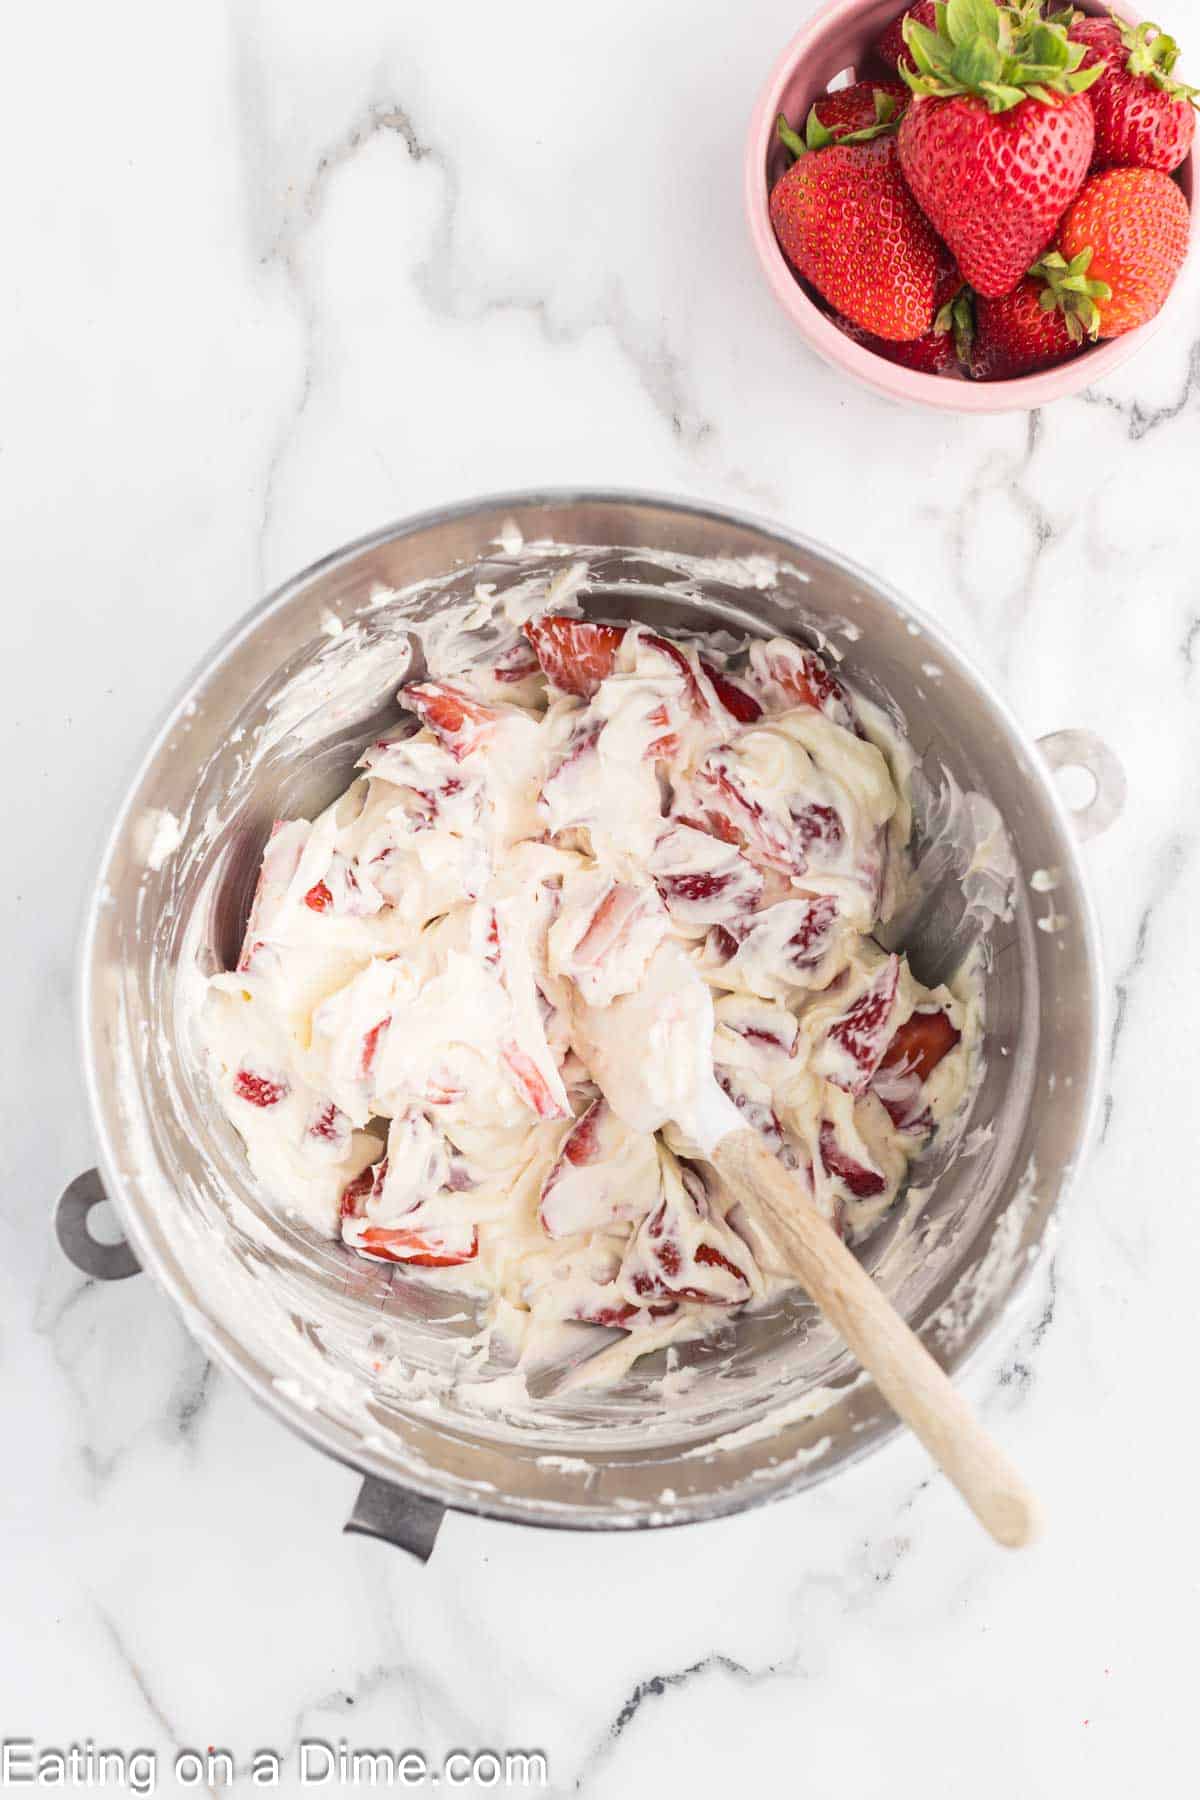 A mixing bowl filled with cream-covered strawberry slices and a wooden spoon sits on a white marble surface, resembling the start of a delightful strawberry crunch bars recipe. Next to the bowl, there's a small pink bowl containing whole fresh strawberries.